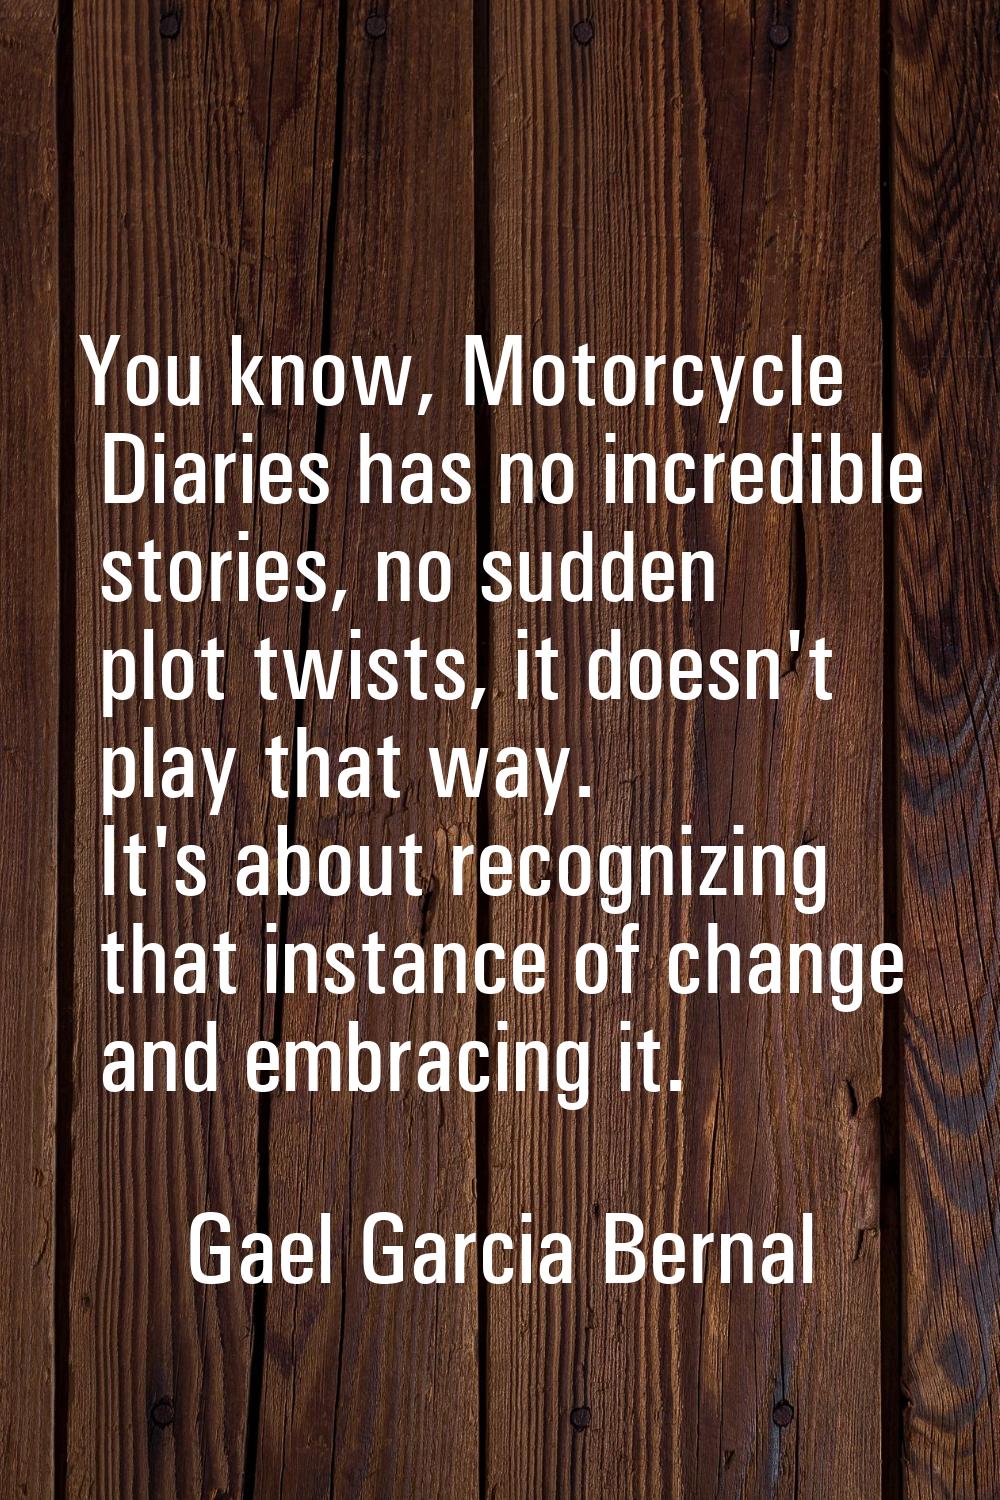 You know, Motorcycle Diaries has no incredible stories, no sudden plot twists, it doesn't play that